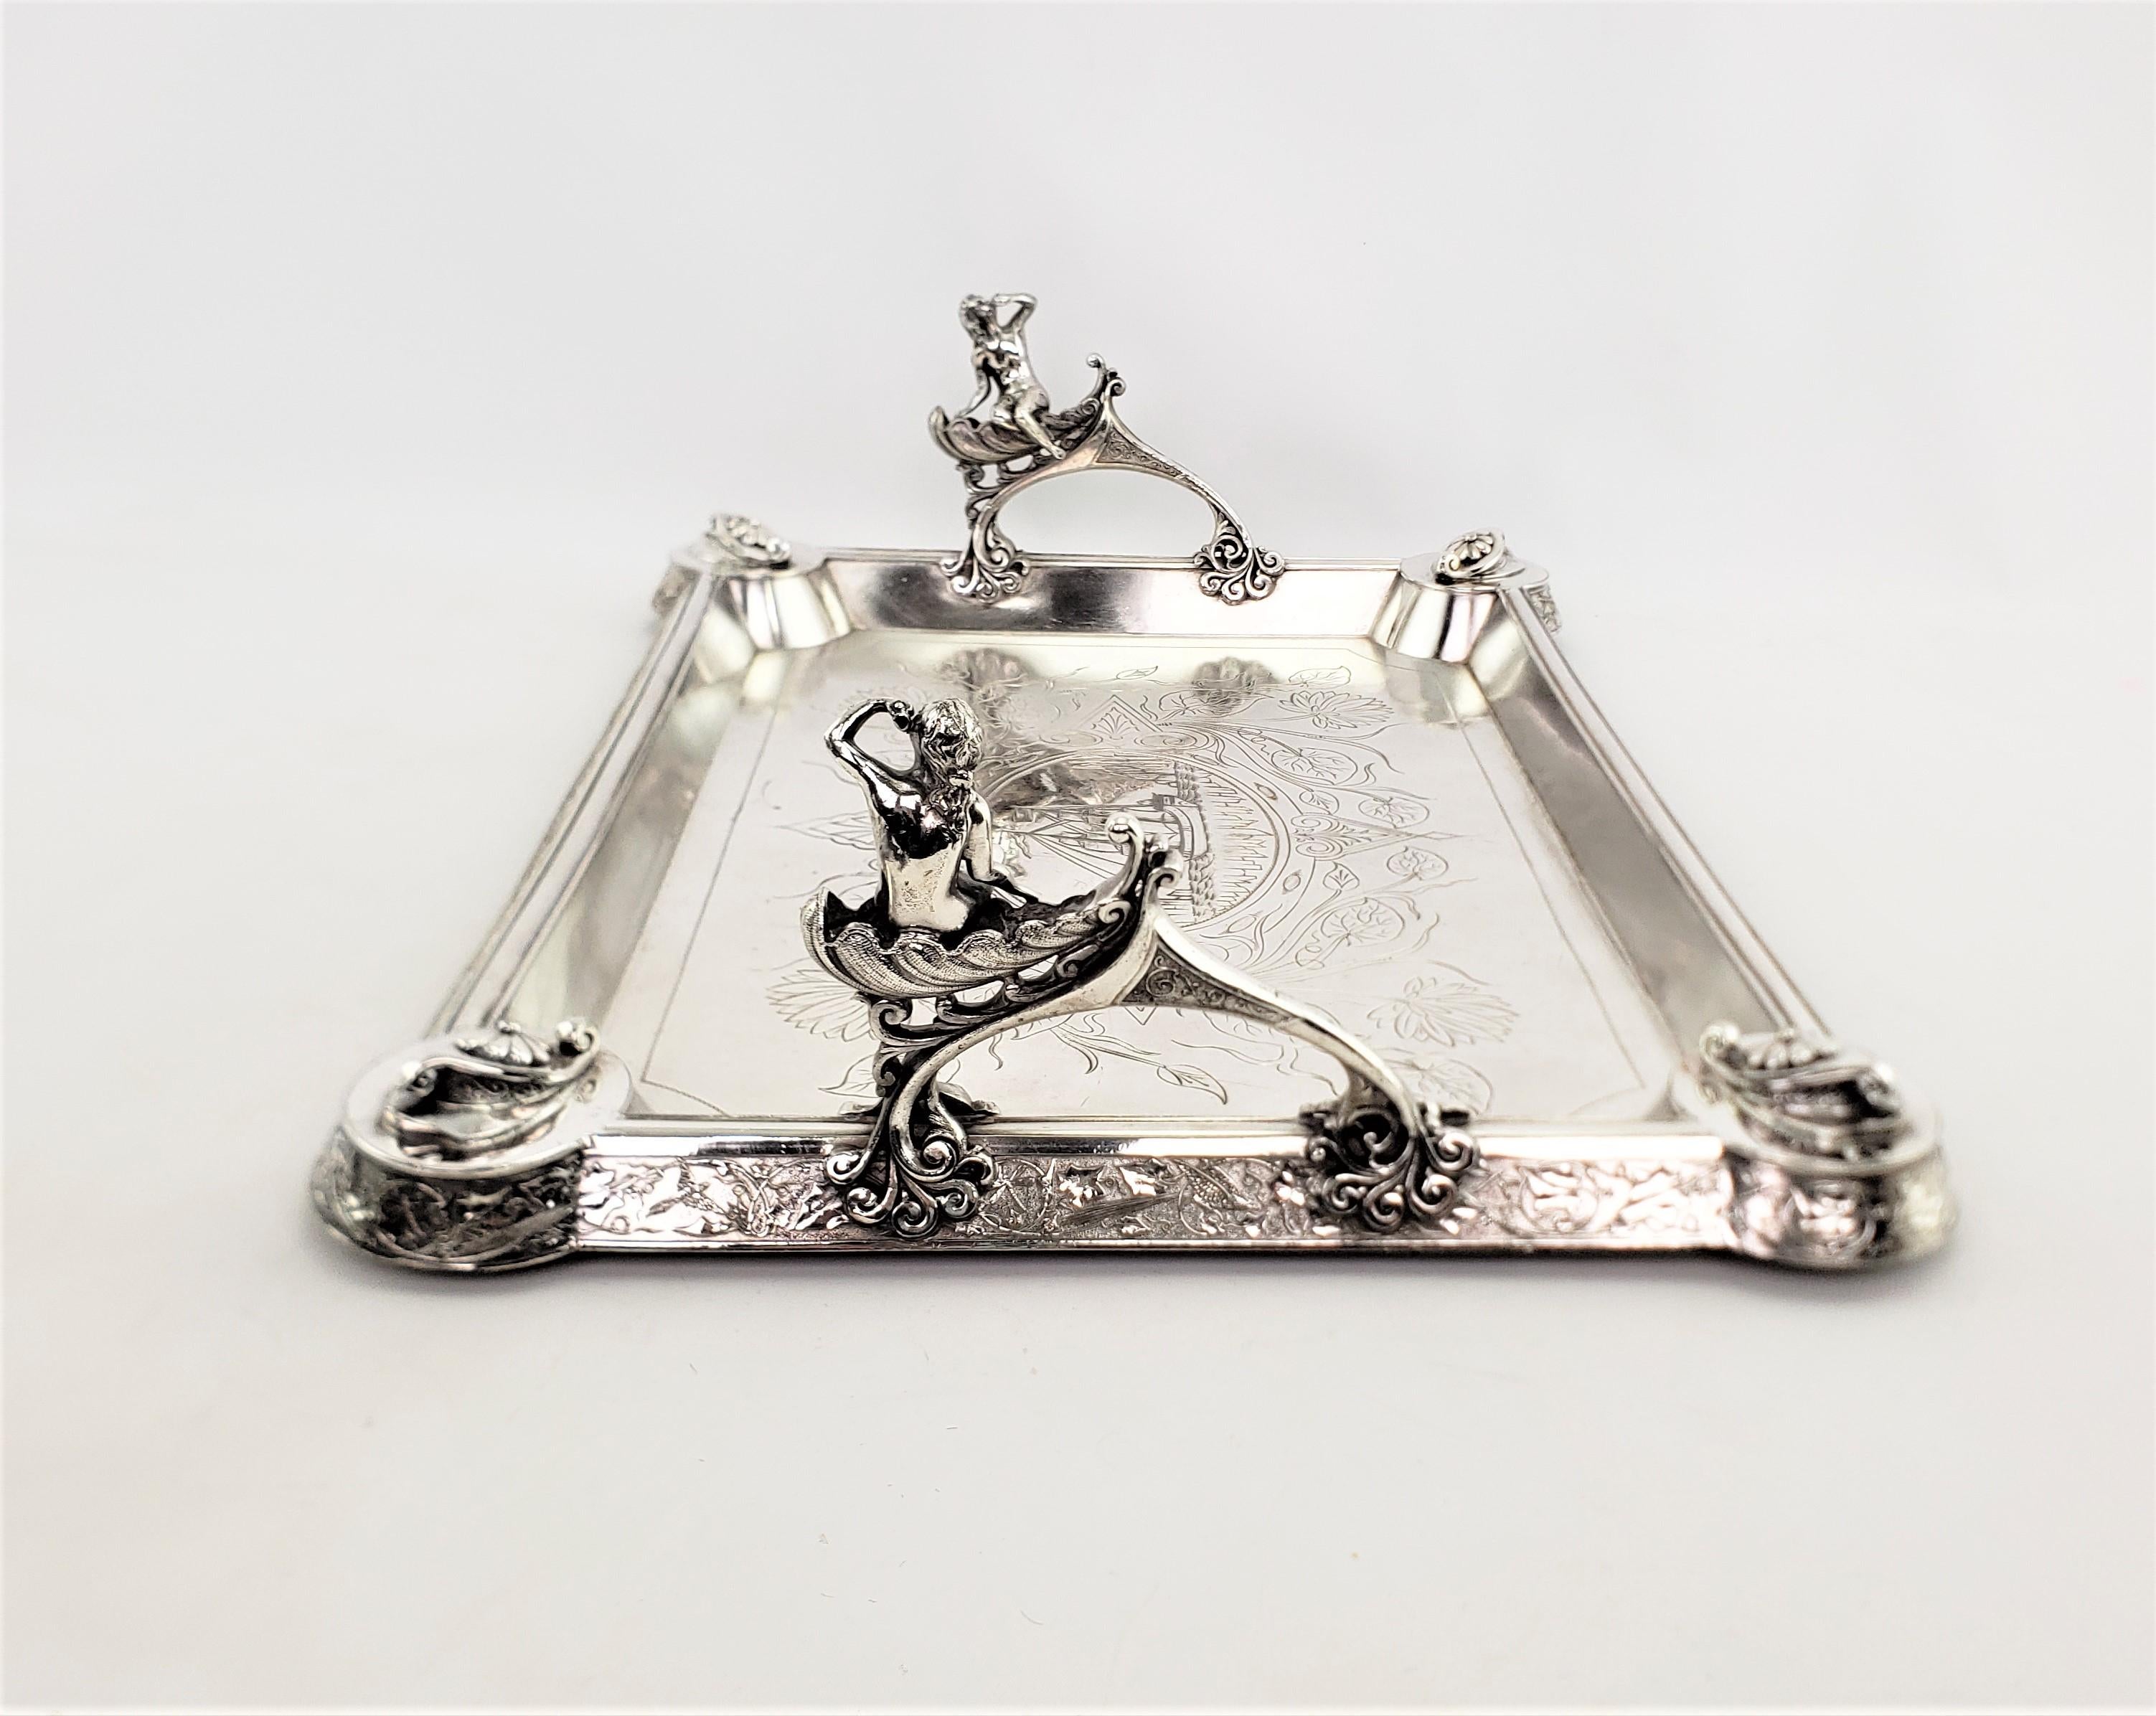 Antique Aesthetic Movement Silver Plated Serving Tray with Figural Siren Handles For Sale 1